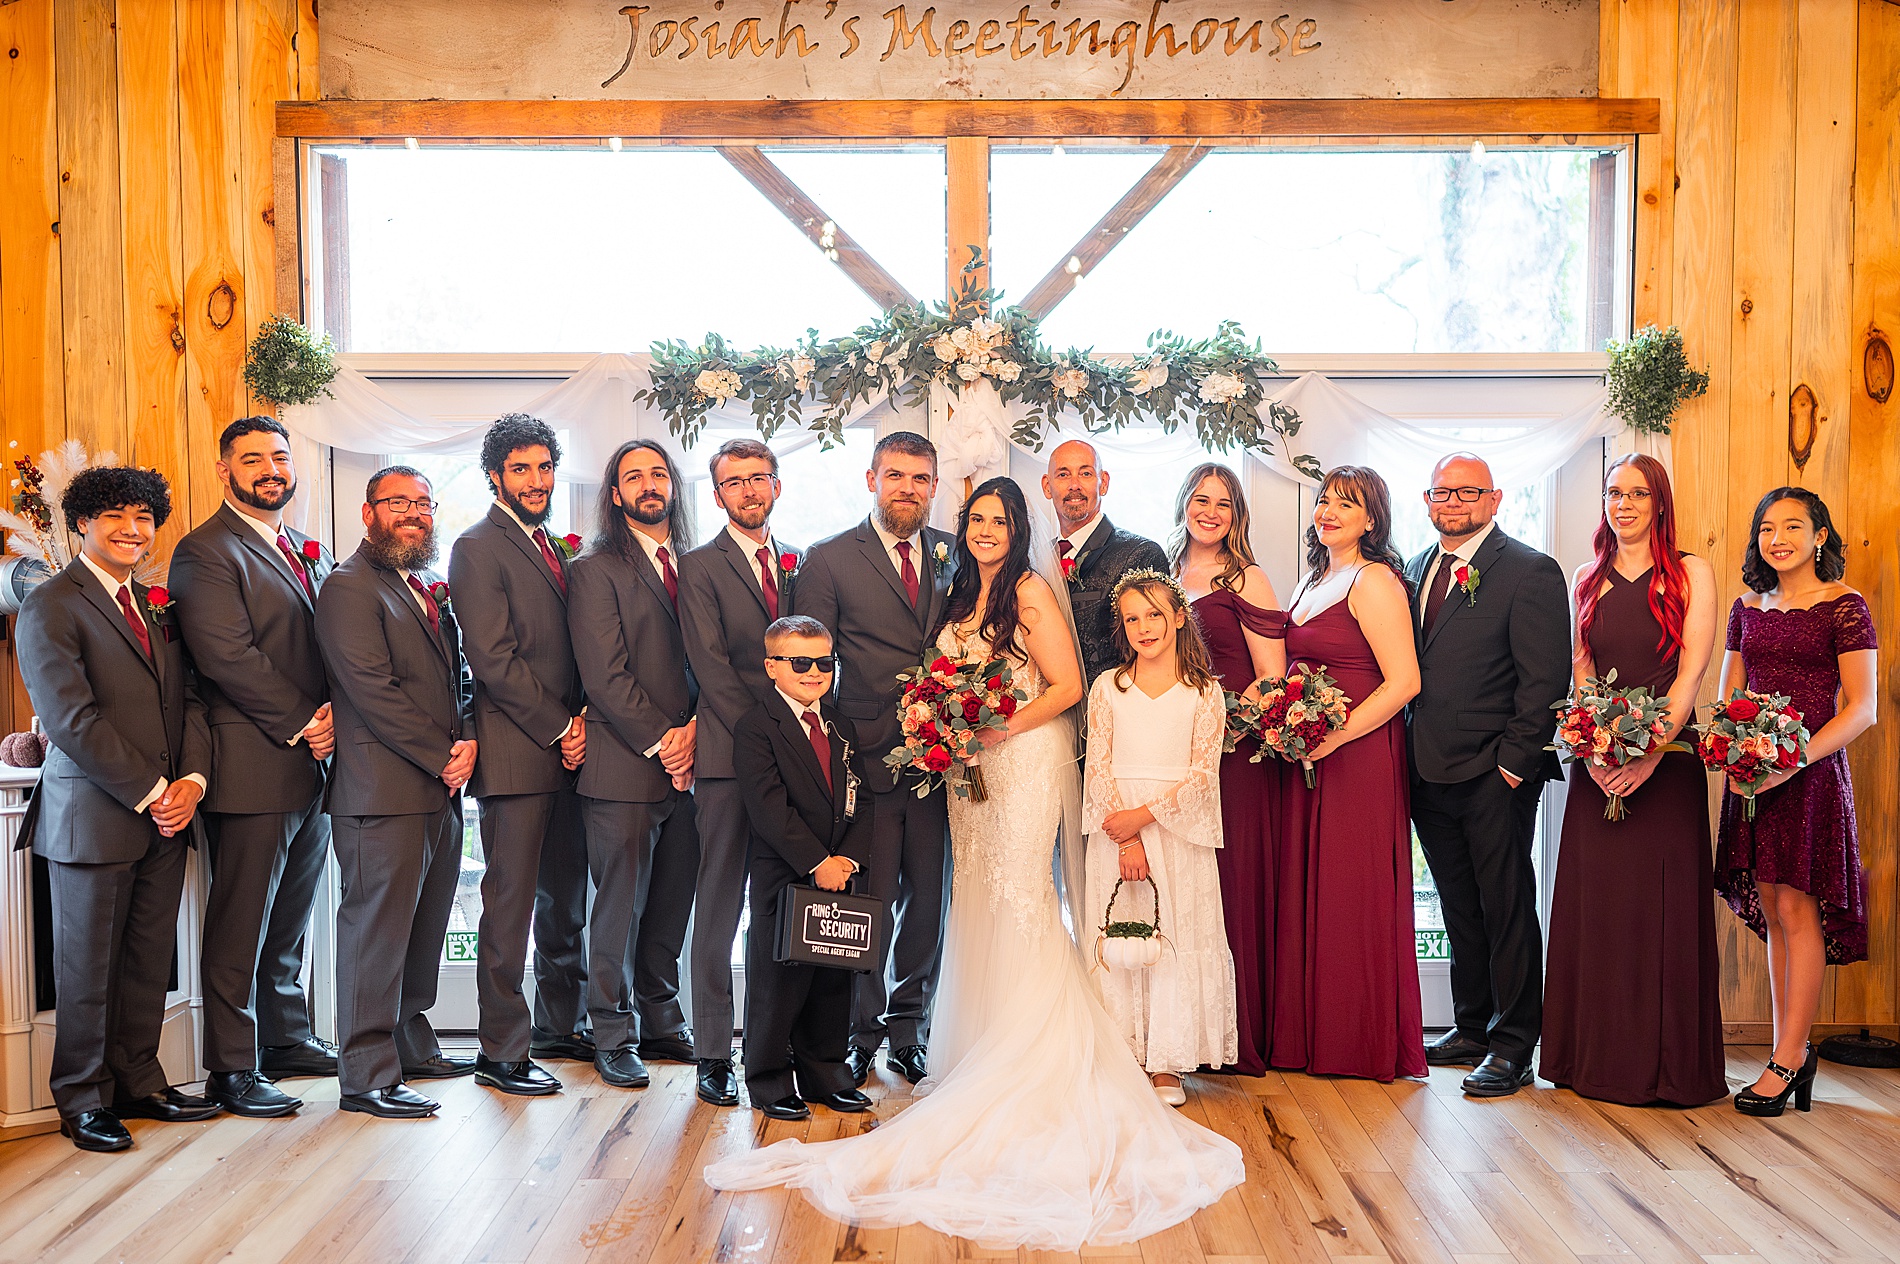 wedding party portraits from Intimate Fall Wedding at Josiah's Meetinghouse 